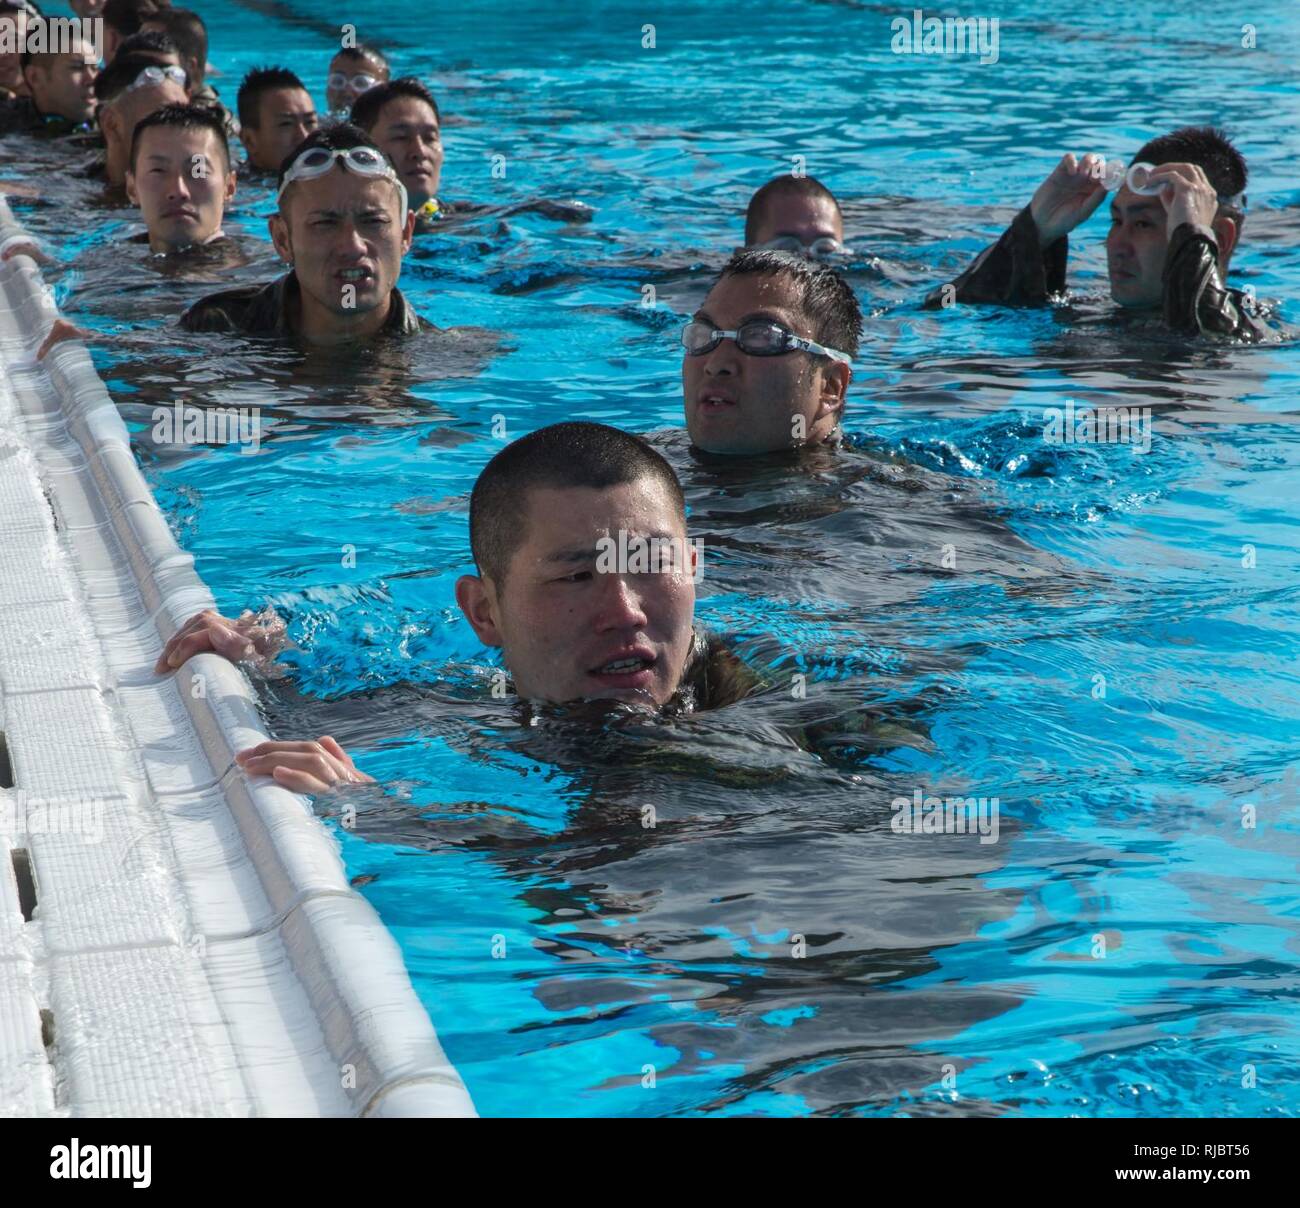 Soldiers in the Japan Ground Self Defense Force conduct Marine Corps intermediate swim qualification as a part of the Exercise Iron Fist on Camp Pendleton, CA, Jan. 16, 2018. Exercise Iron Fist brings together U.S. Marines from the 11th Marine Expeditionary Unit and Soldiers from the Japan Ground Self Defense Force, Western Army Infantry Regiment, to improve bilateral planning, communicating, and conduct combined amphibious operations. Stock Photo